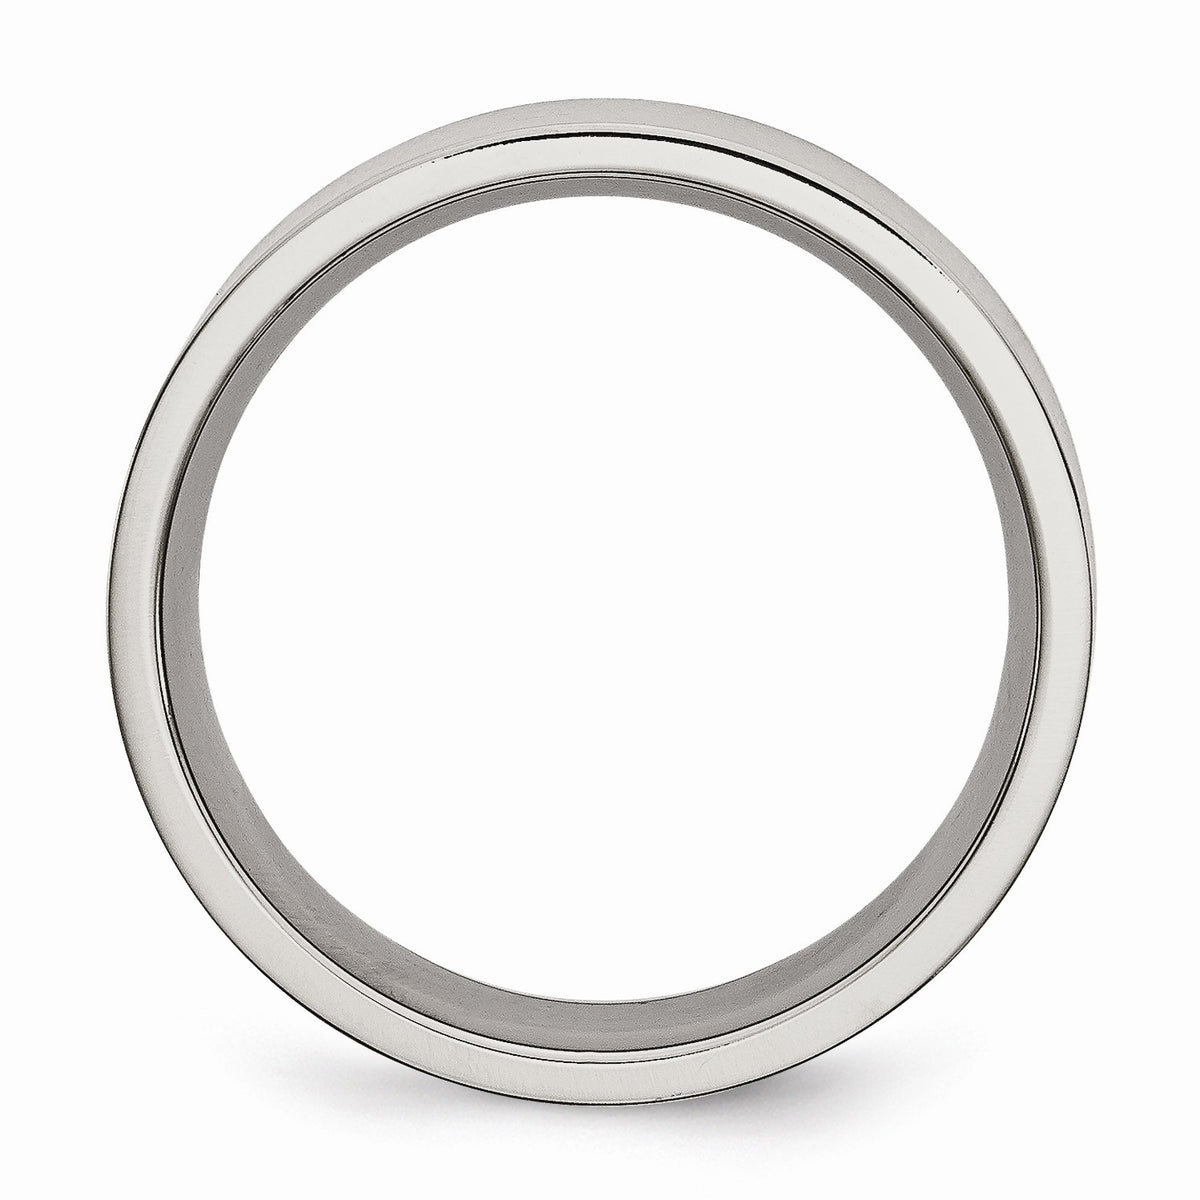 Alternate view of the Titanium 8mm Brushed Flat Comfort Fit Band by The Black Bow Jewelry Co.